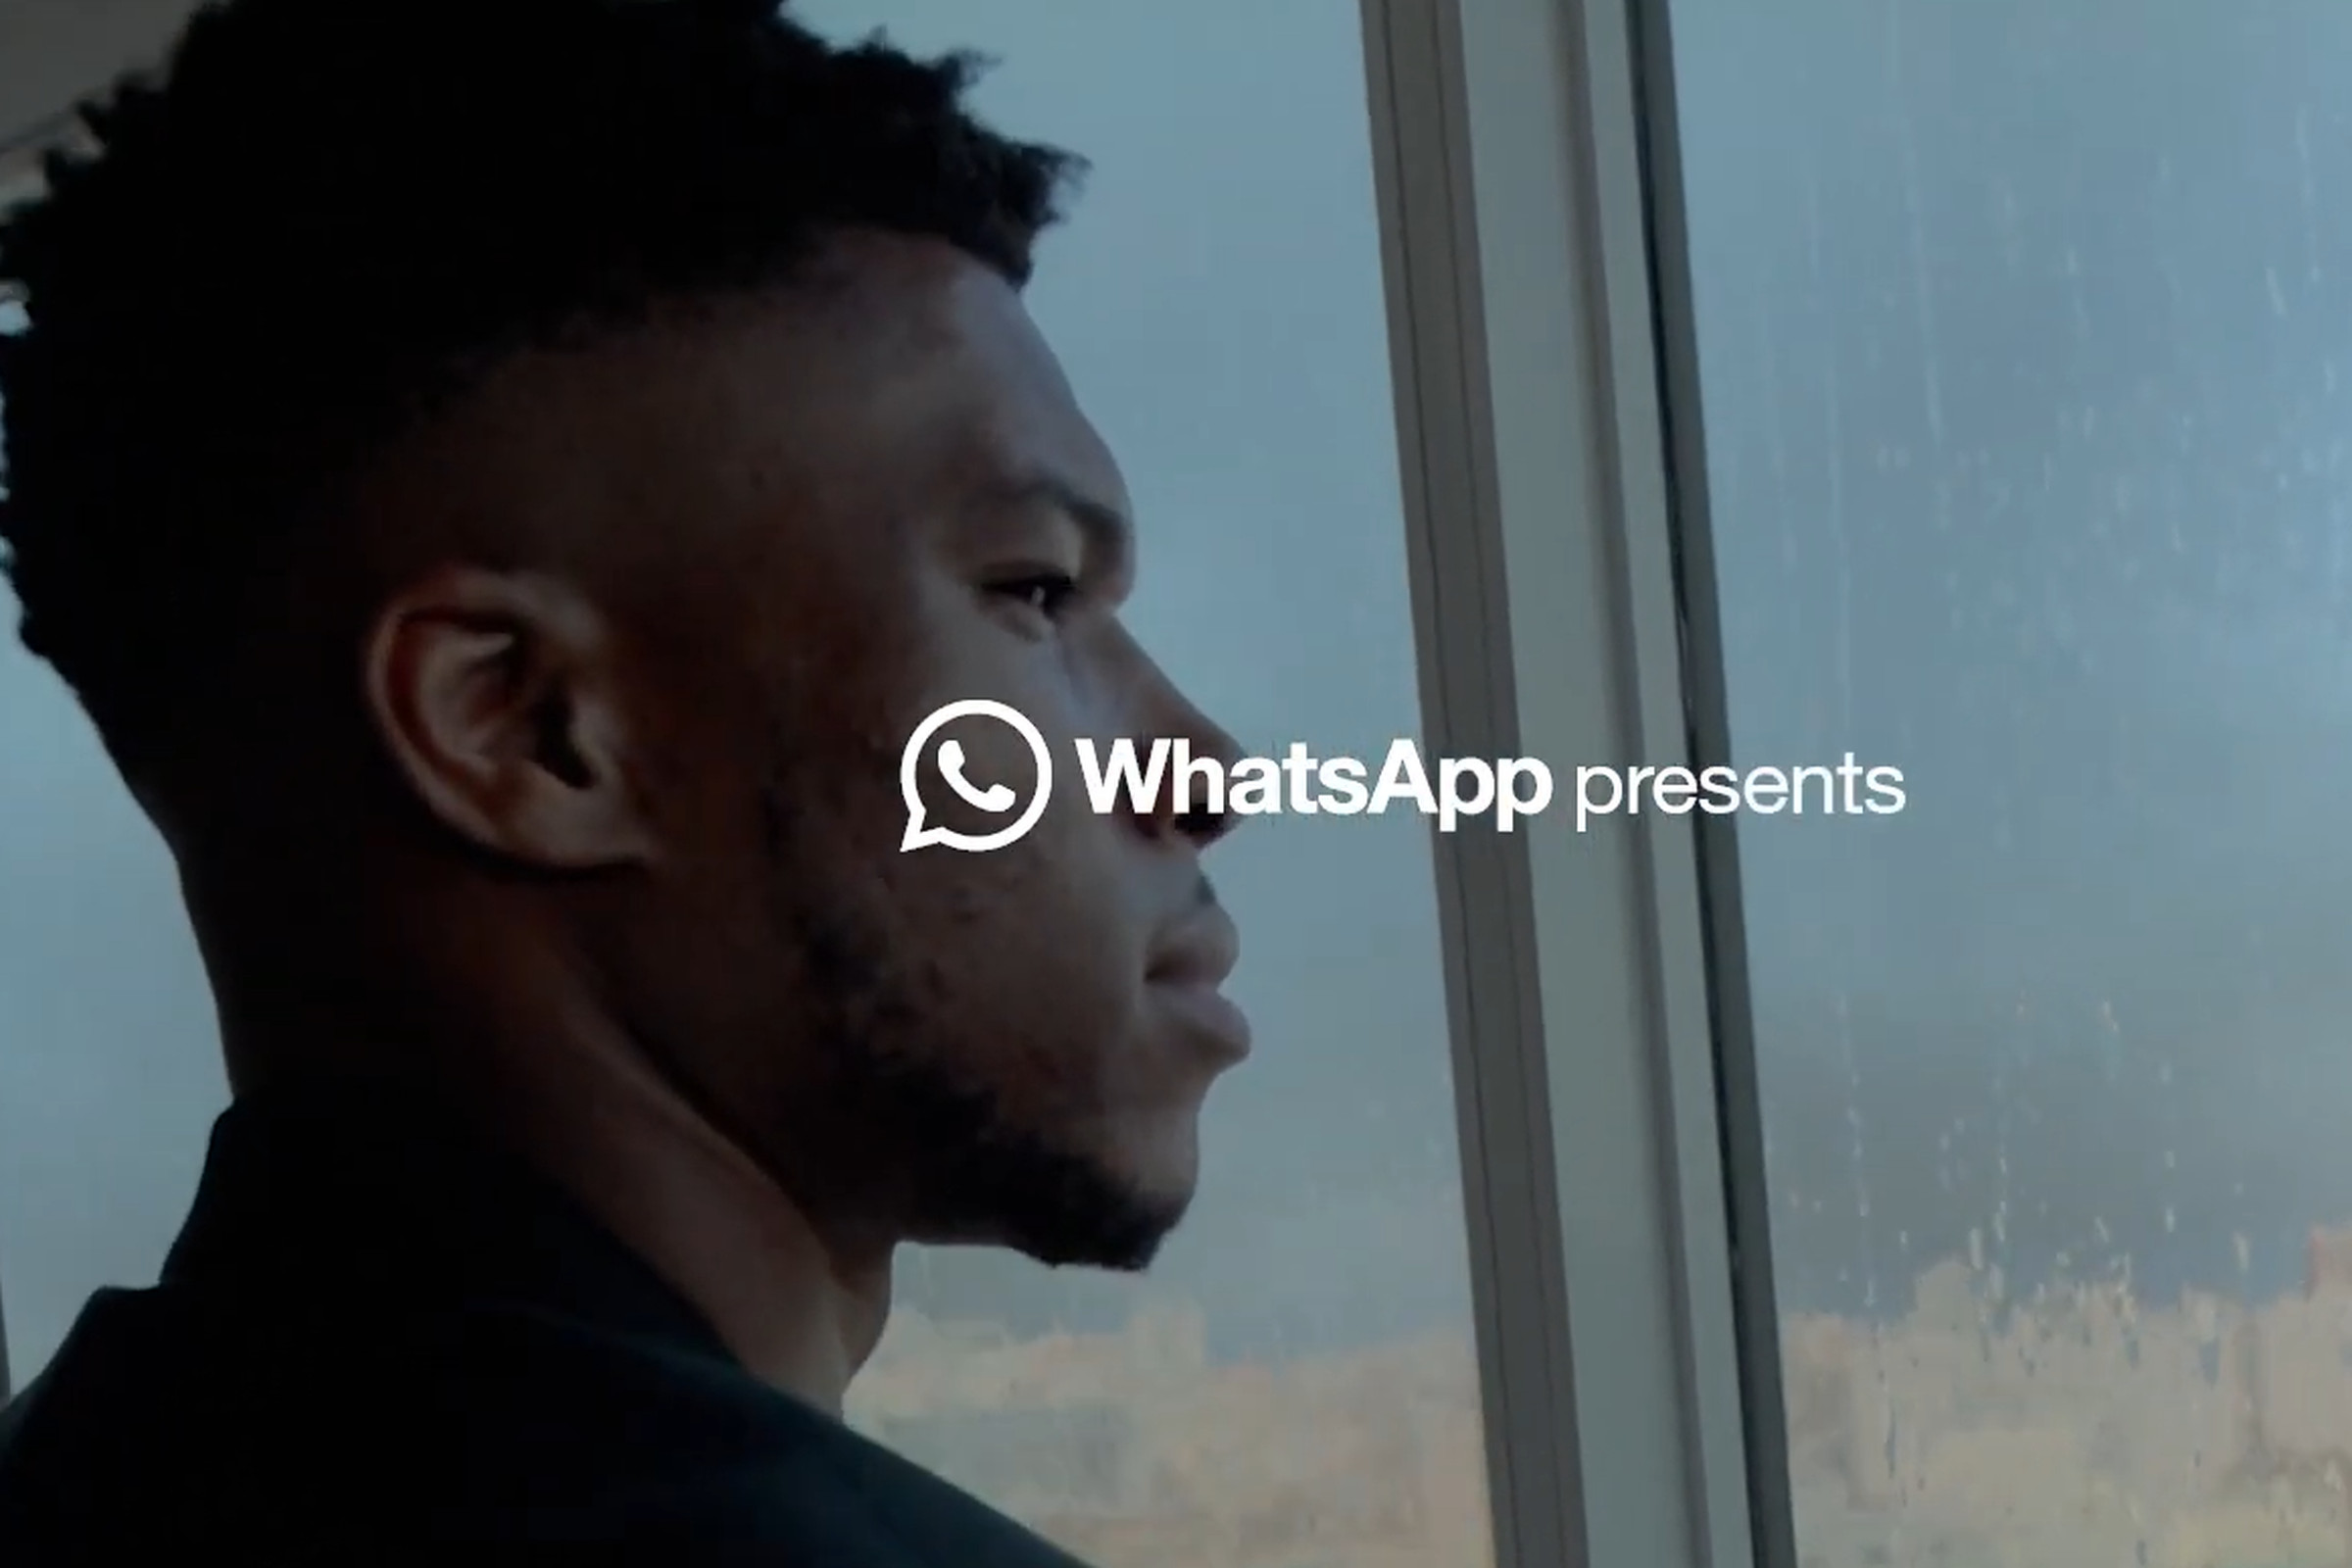 Giannis Antetokounmpo stands in front of a window. The WhatsApp logo is overlaid in front of his face.